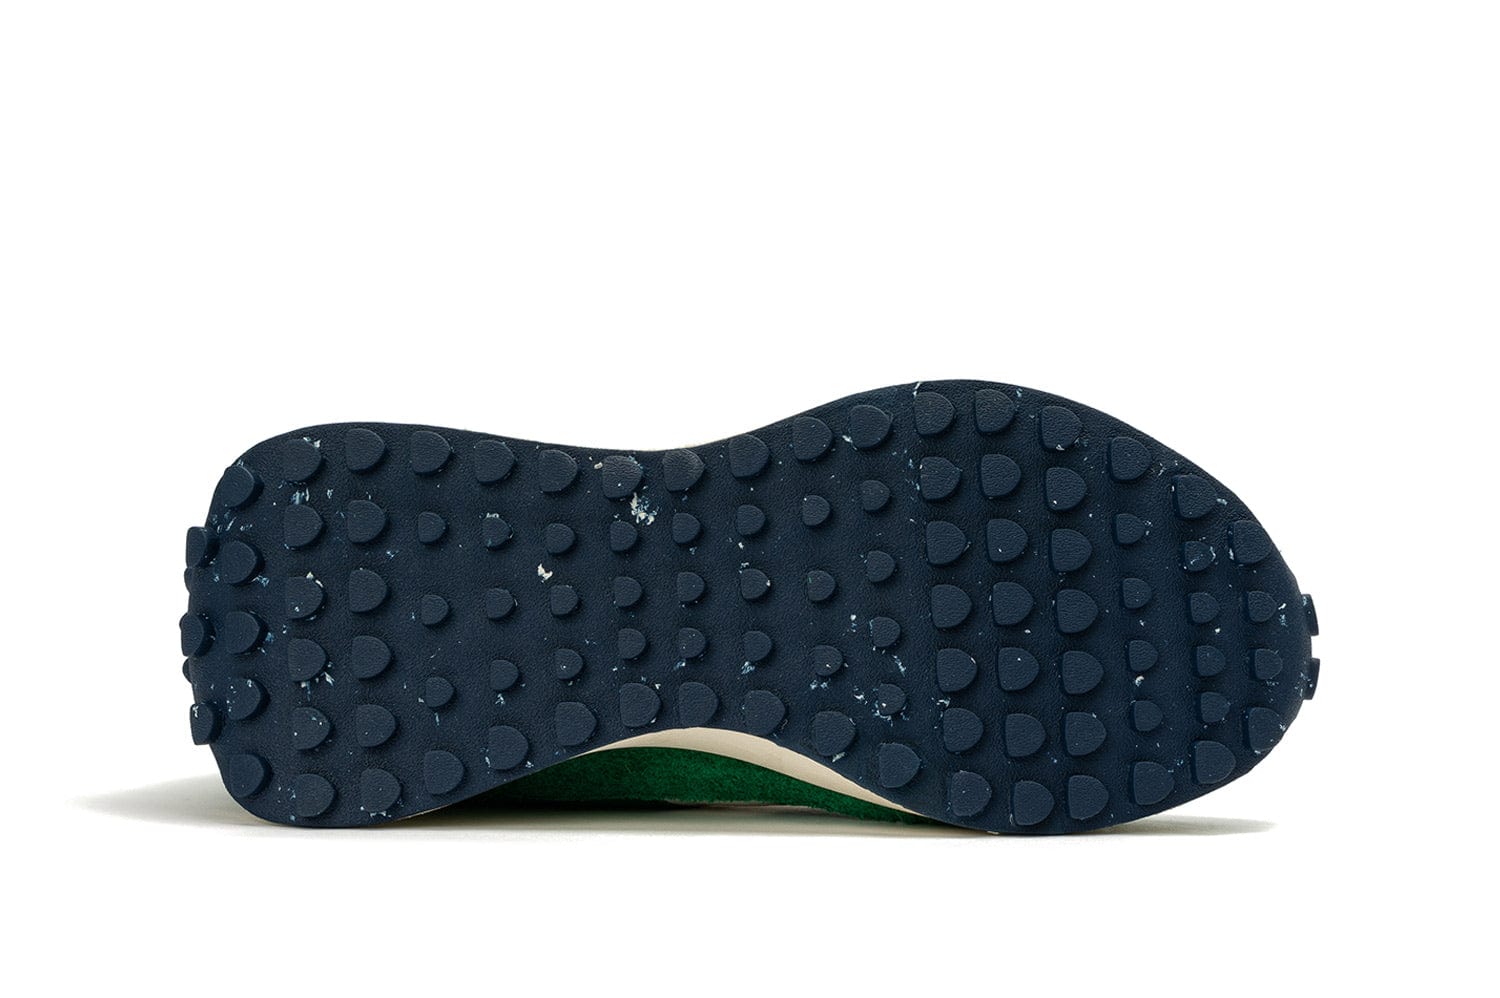 View of the sole of the Acorn Trainer in the color Grass Green, showcasing the recycled material sole.